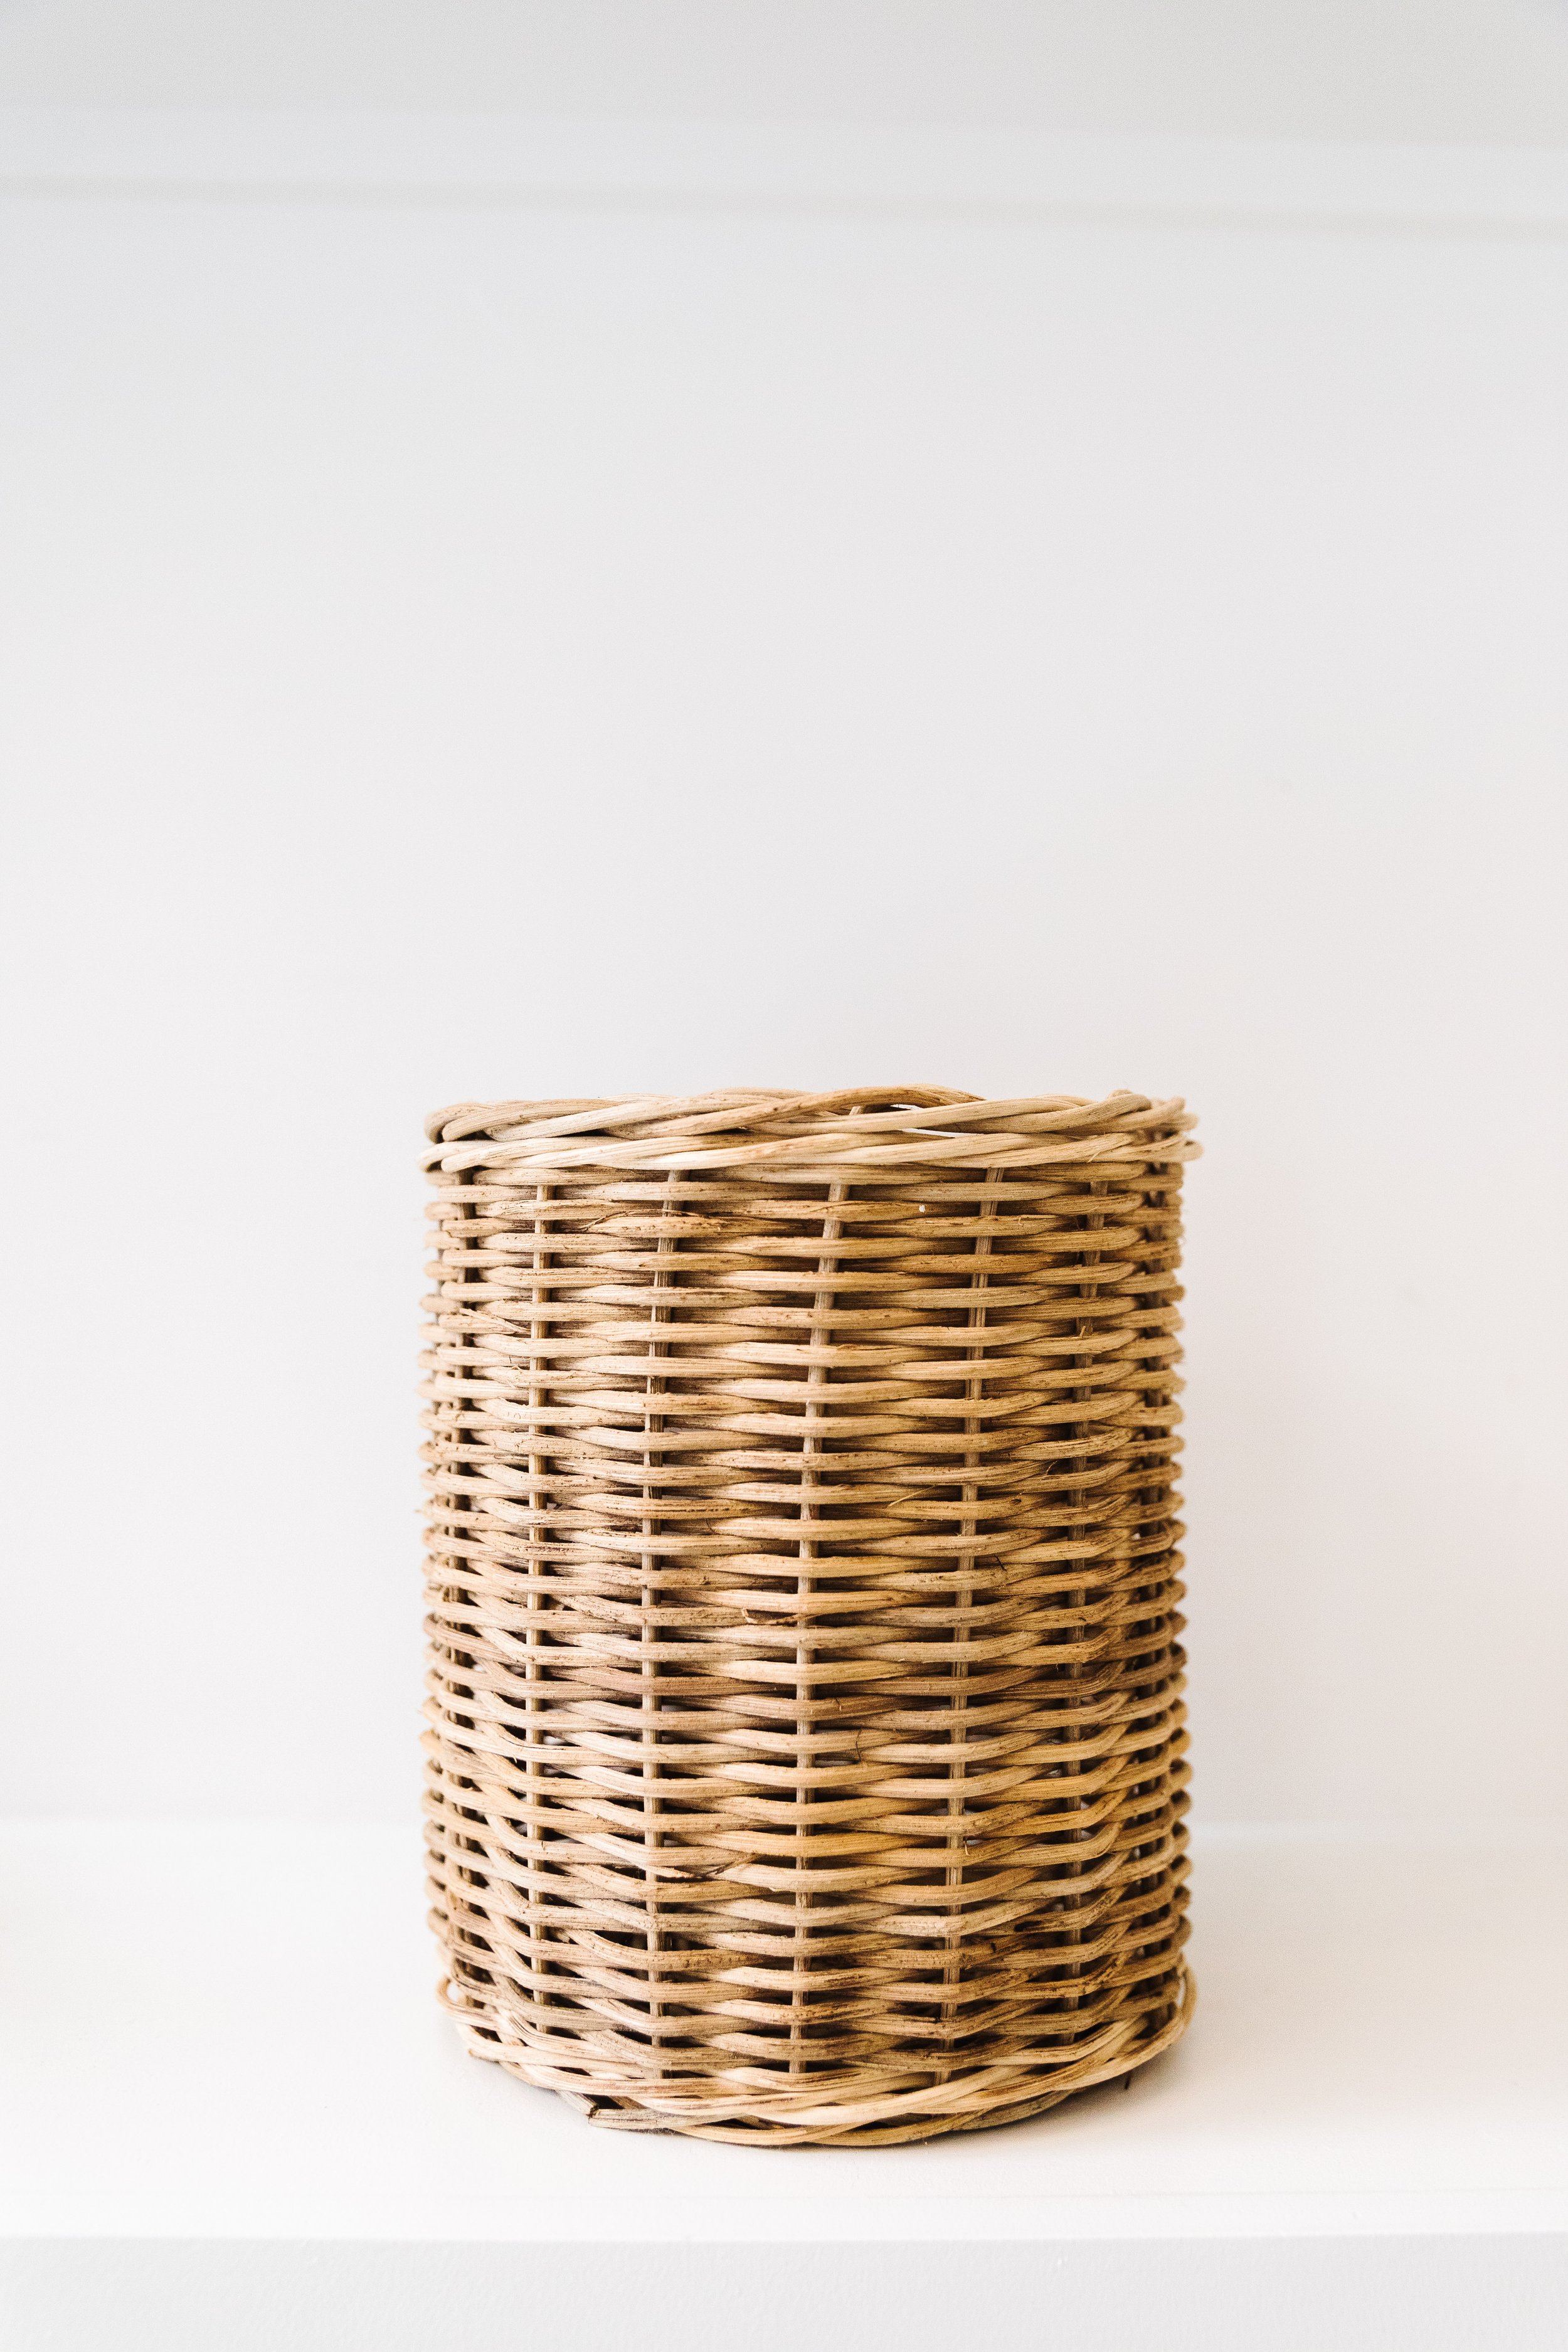 Wald Imports - Medium Light Brown Hand Woven Wicker Basket for Storage with  Handles - Woven Basket - Wicker Baskets for Picnics, Easter, Organizing